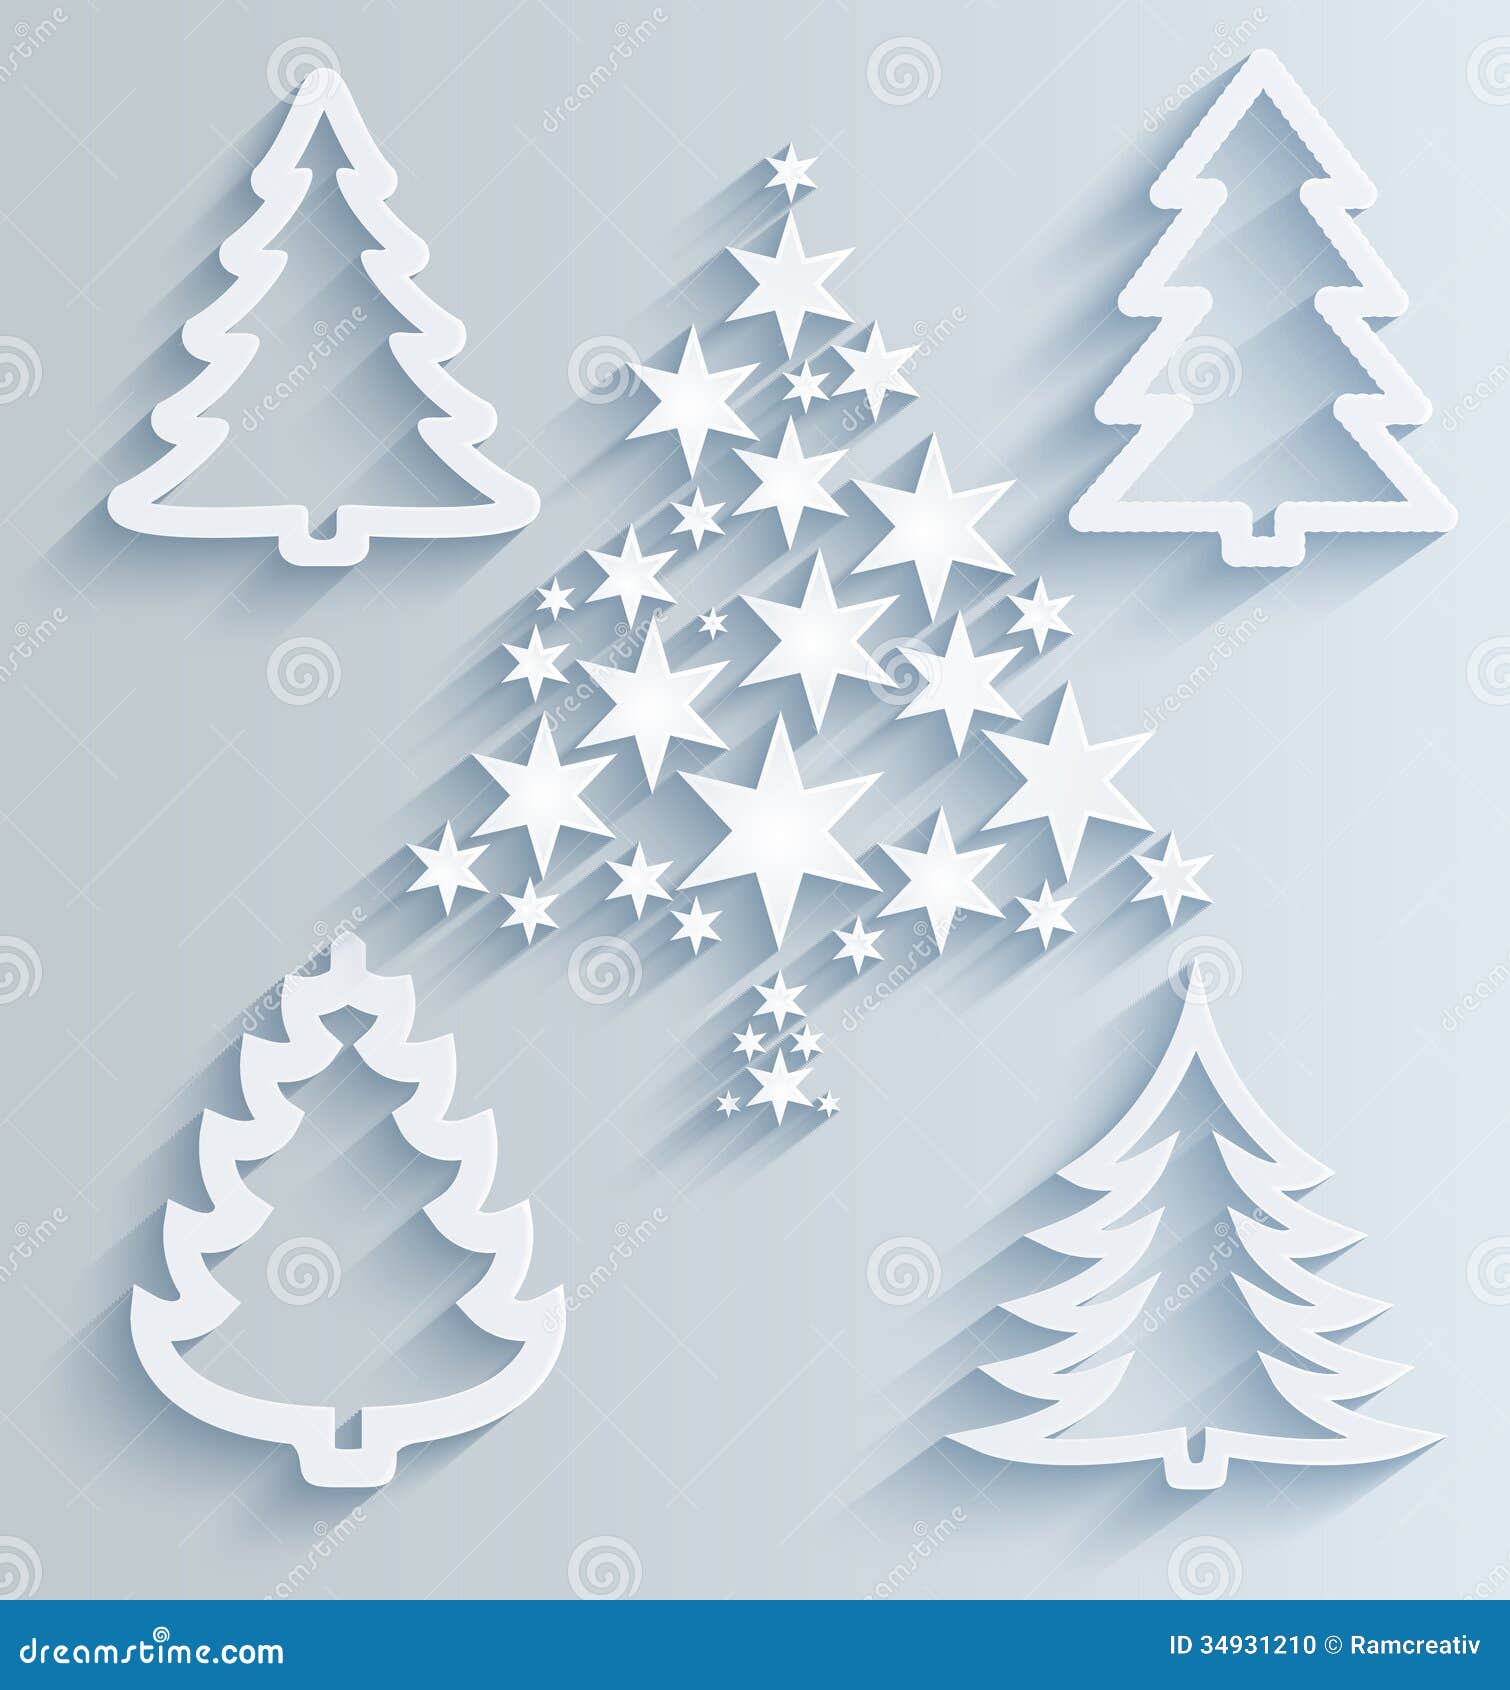 Christmas Trees. Paper Holiday Decorations Stock Photo - Image ...